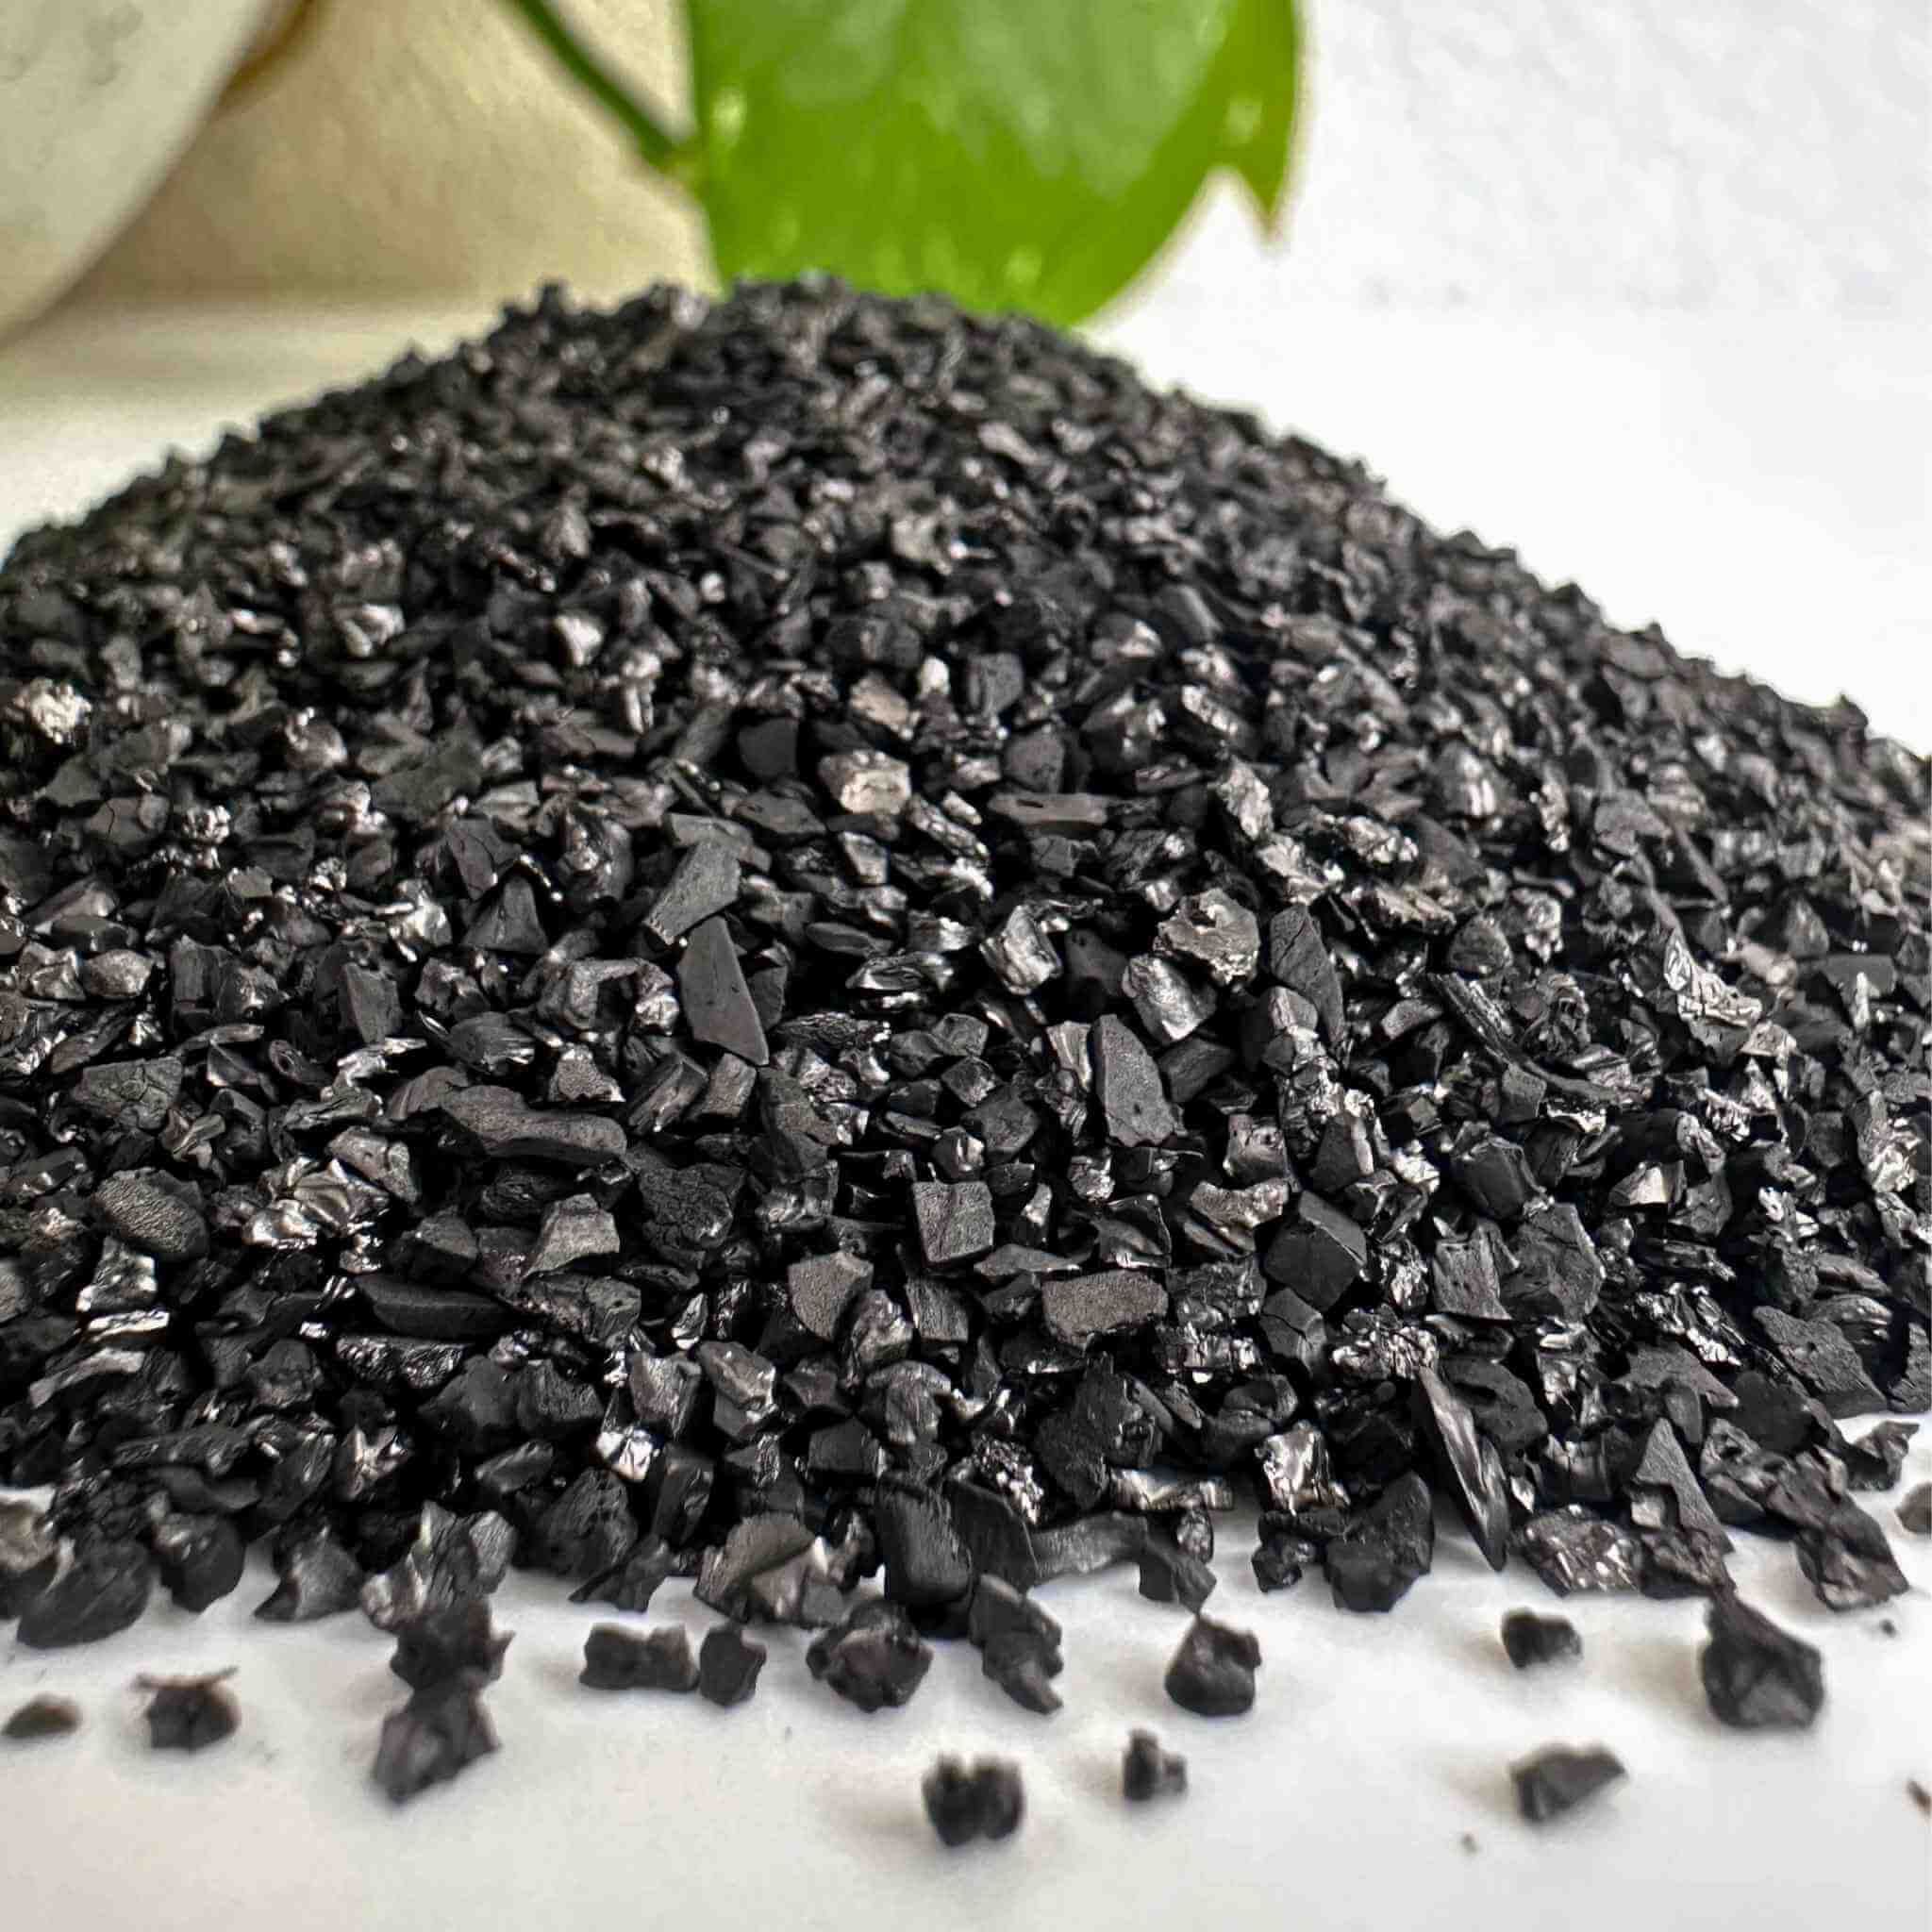 Activated Charcoal for Terrariums (Filter-Grade Coconut Carbon)